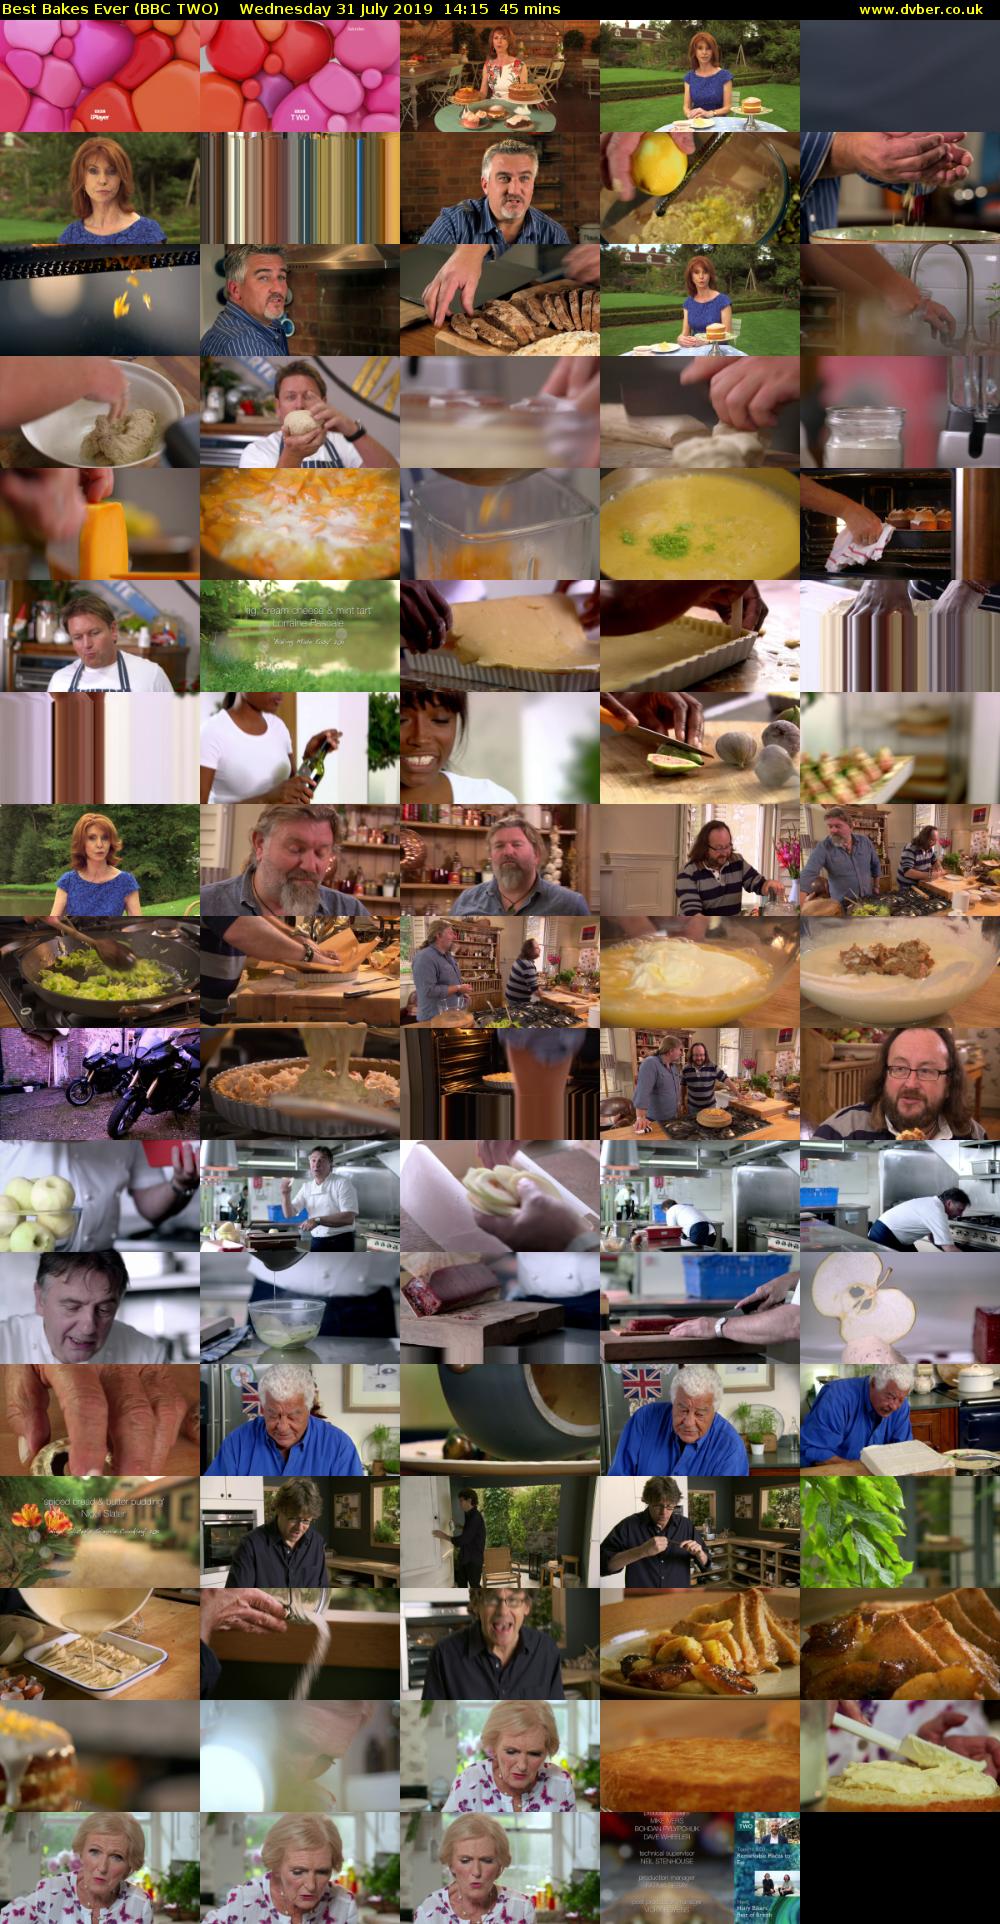 Best Bakes Ever (BBC TWO) Wednesday 31 July 2019 14:15 - 15:00